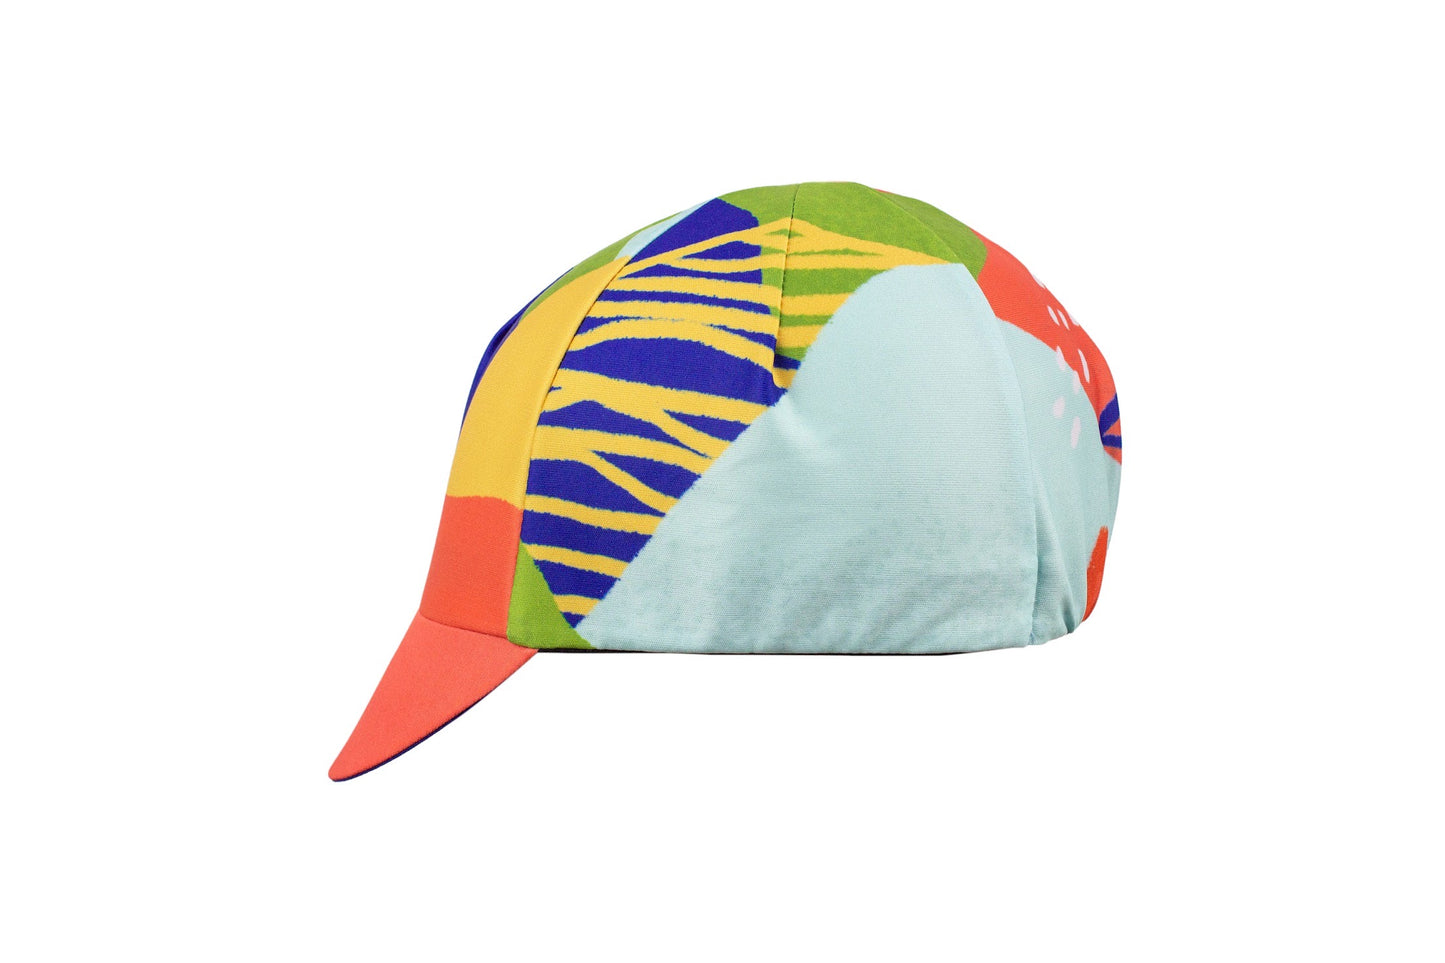 GWxMTH “The Great Outdoors” 4-Panel Cycling cap